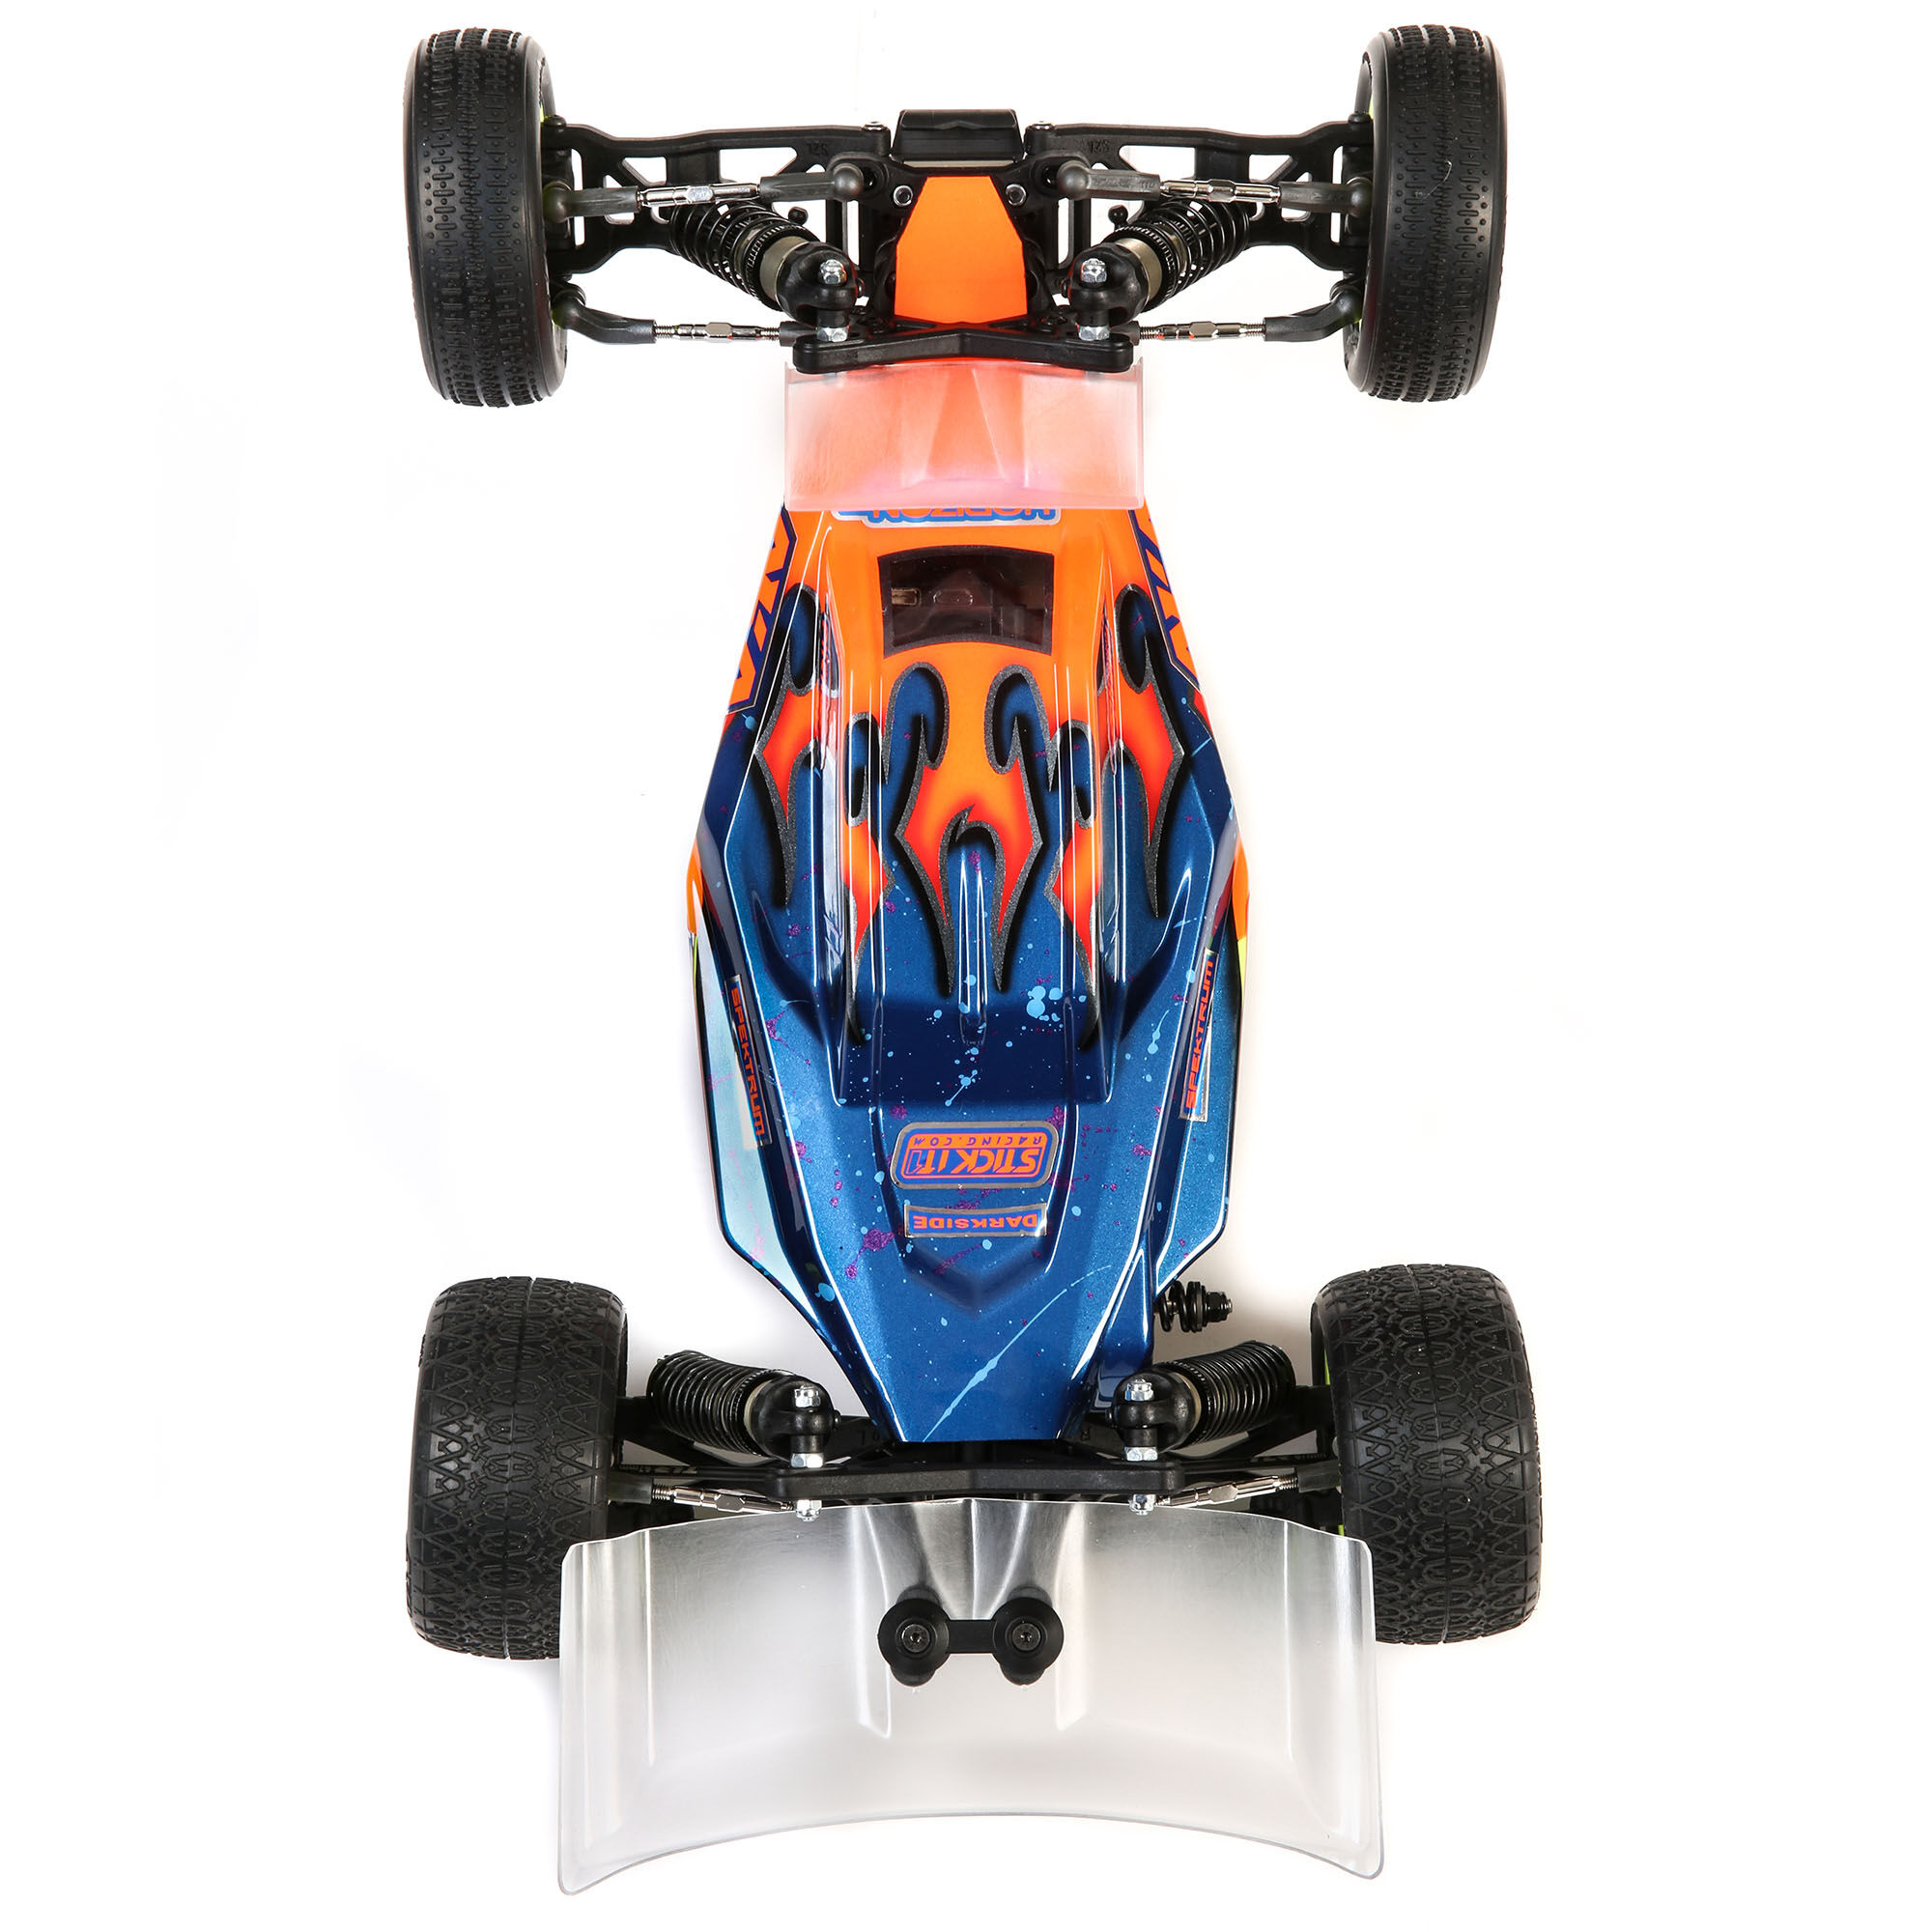 best 2wd buggy 2019